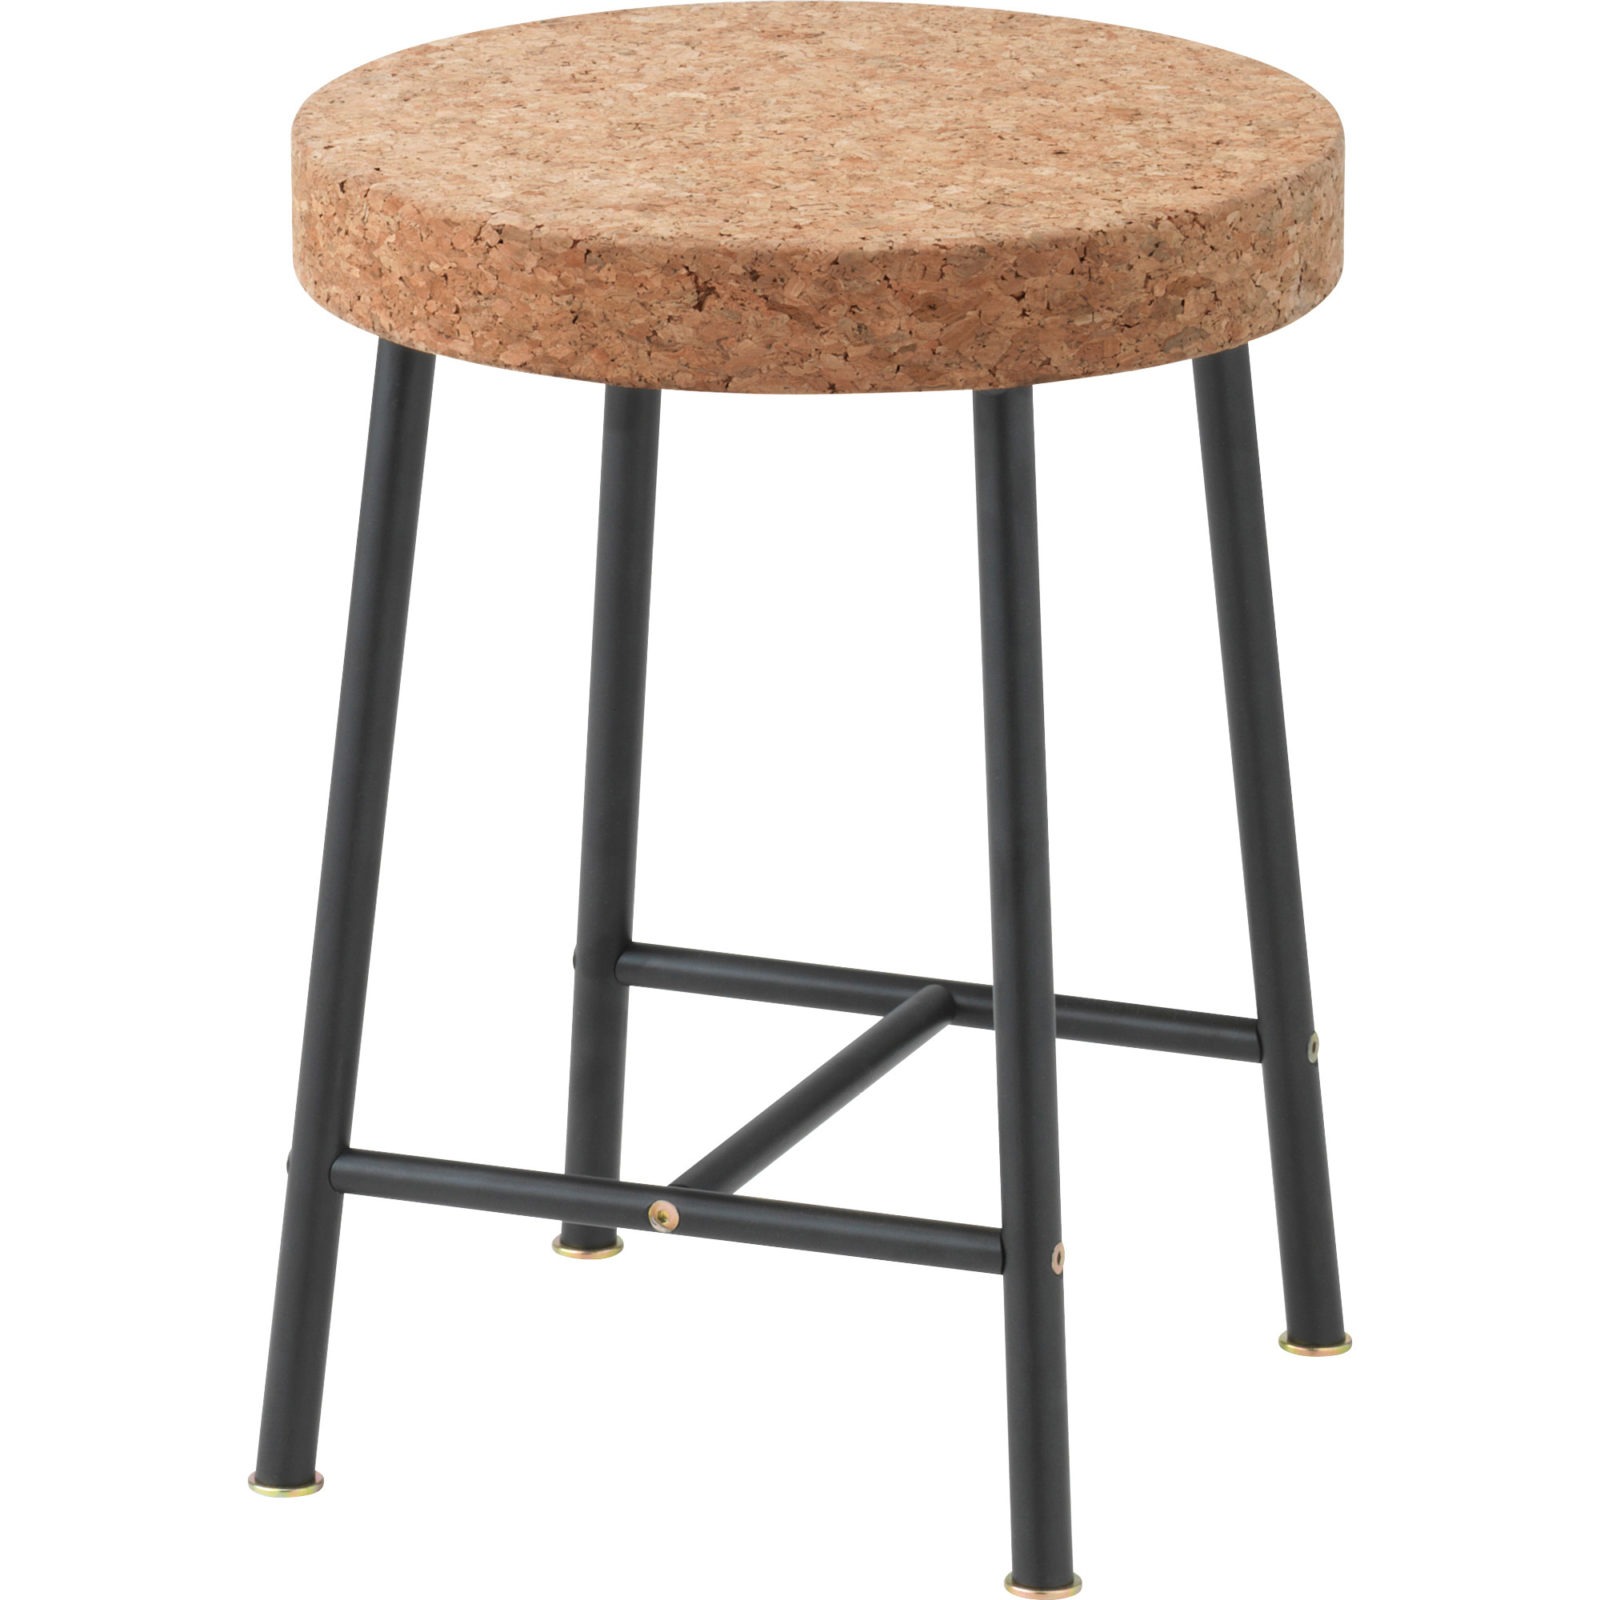 Stool with round cork seat and black-lacquered steel legs, SINNERLIG.